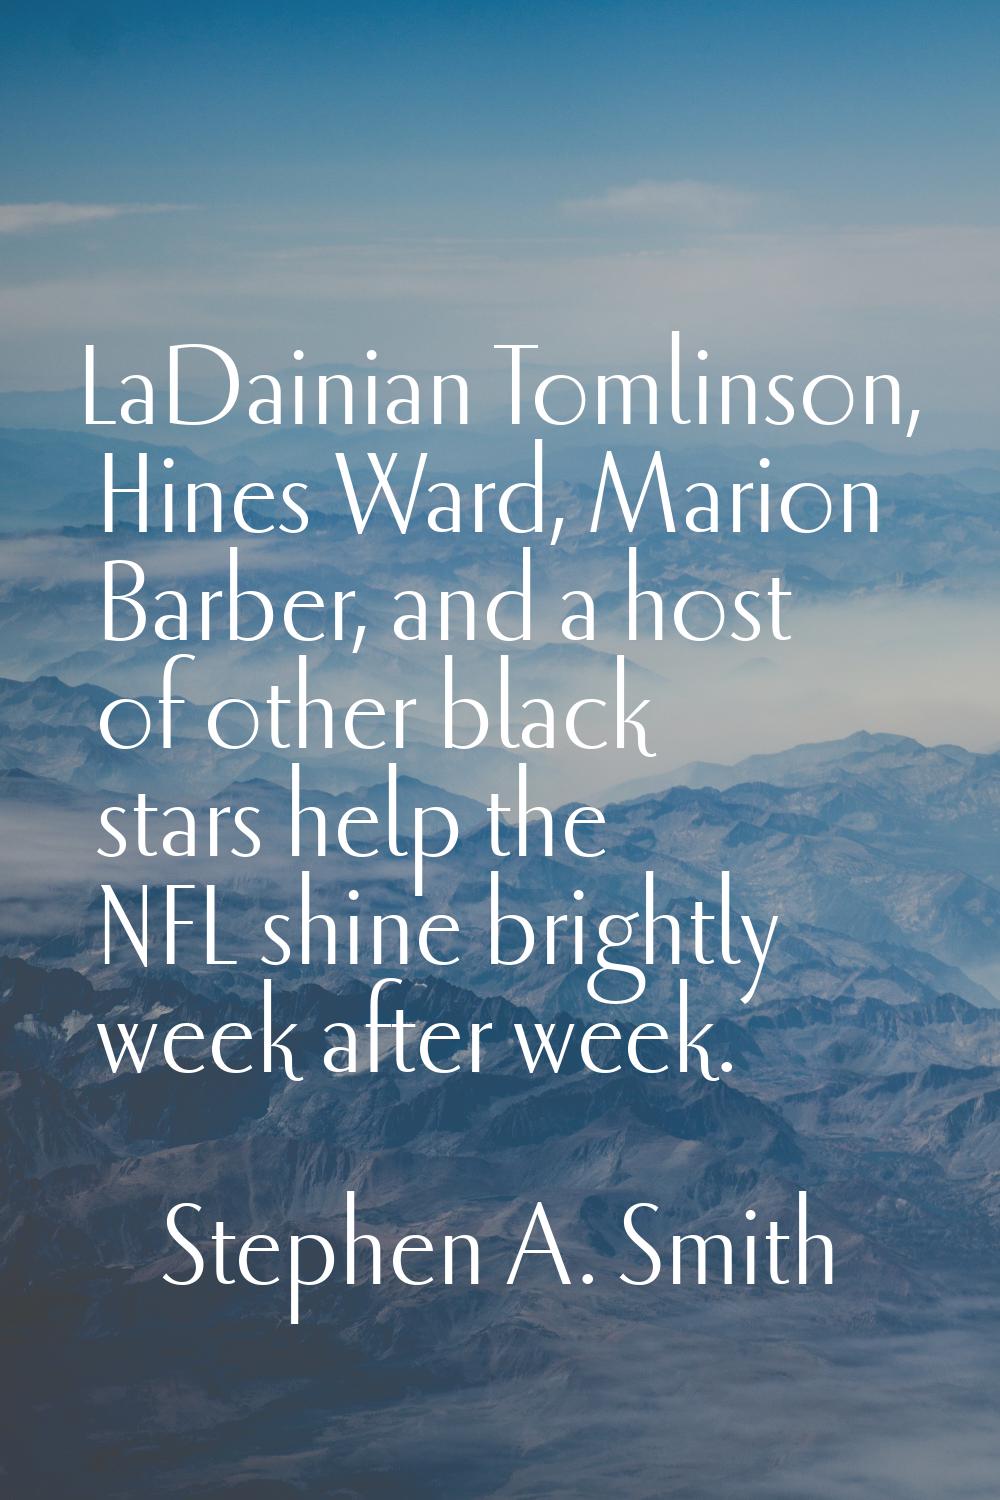 LaDainian Tomlinson, Hines Ward, Marion Barber, and a host of other black stars help the NFL shine 